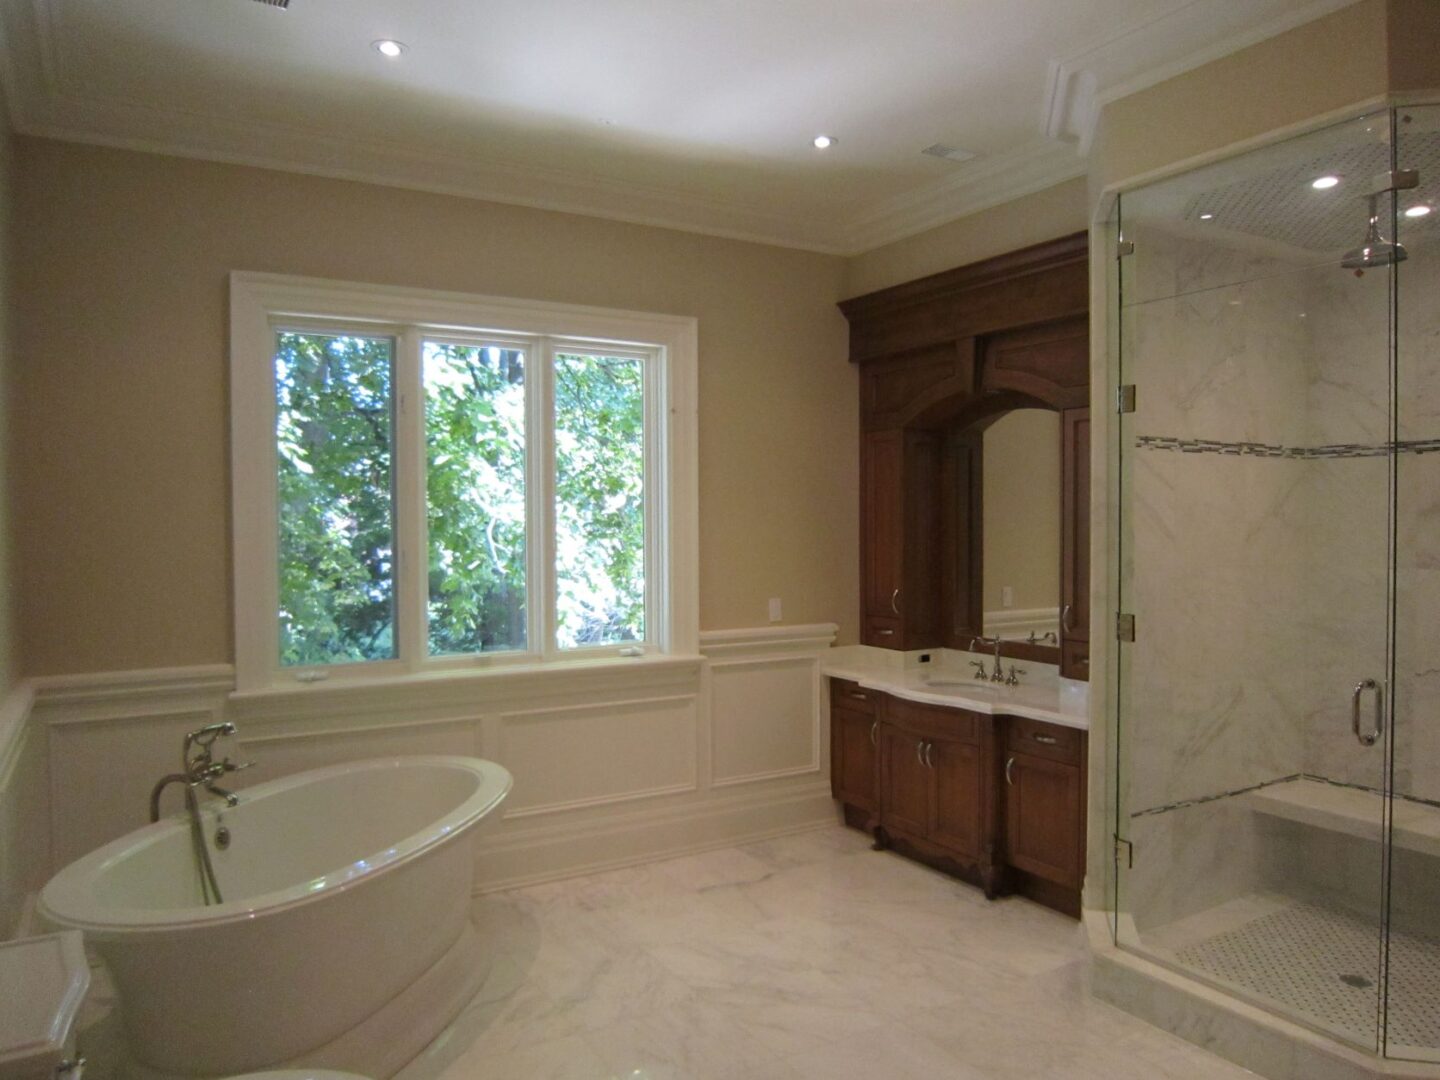 A Bathroom With a Glass Shower With a White Tub